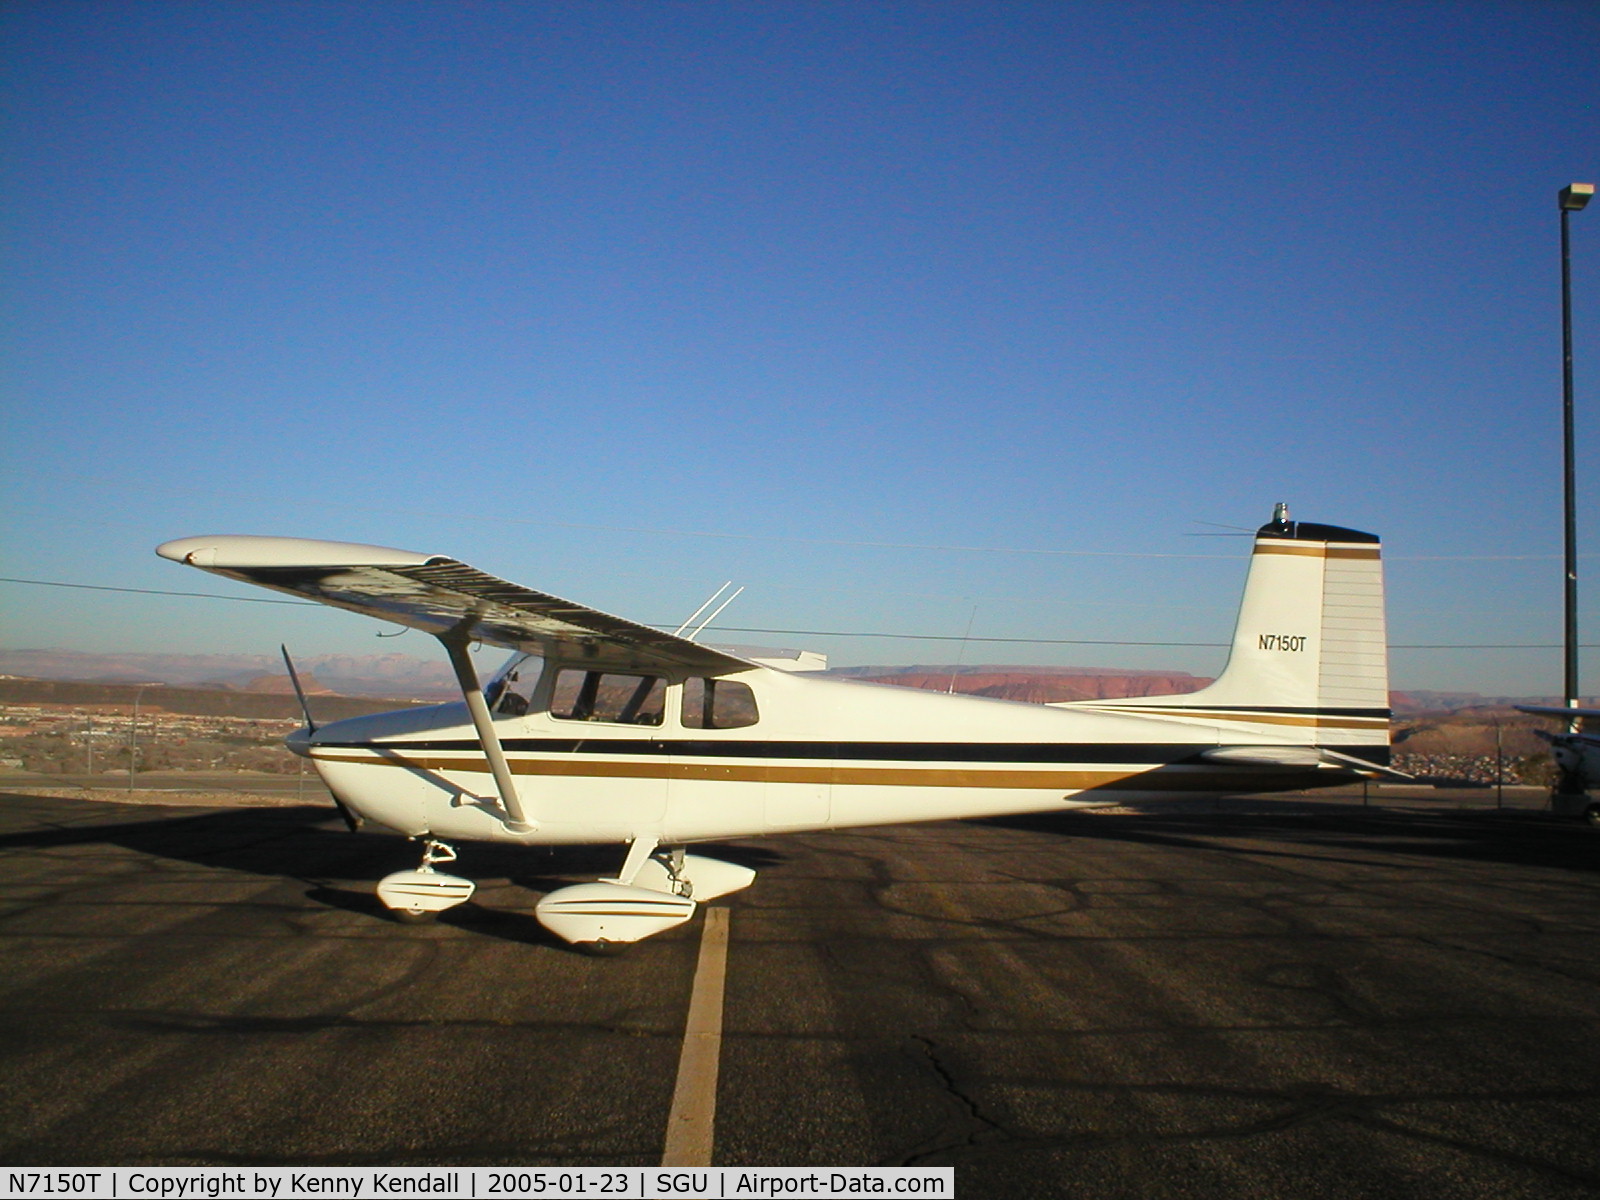 N7150T, 1959 Cessna 172 C/N 46750, Looking pretty with a fresh paint job